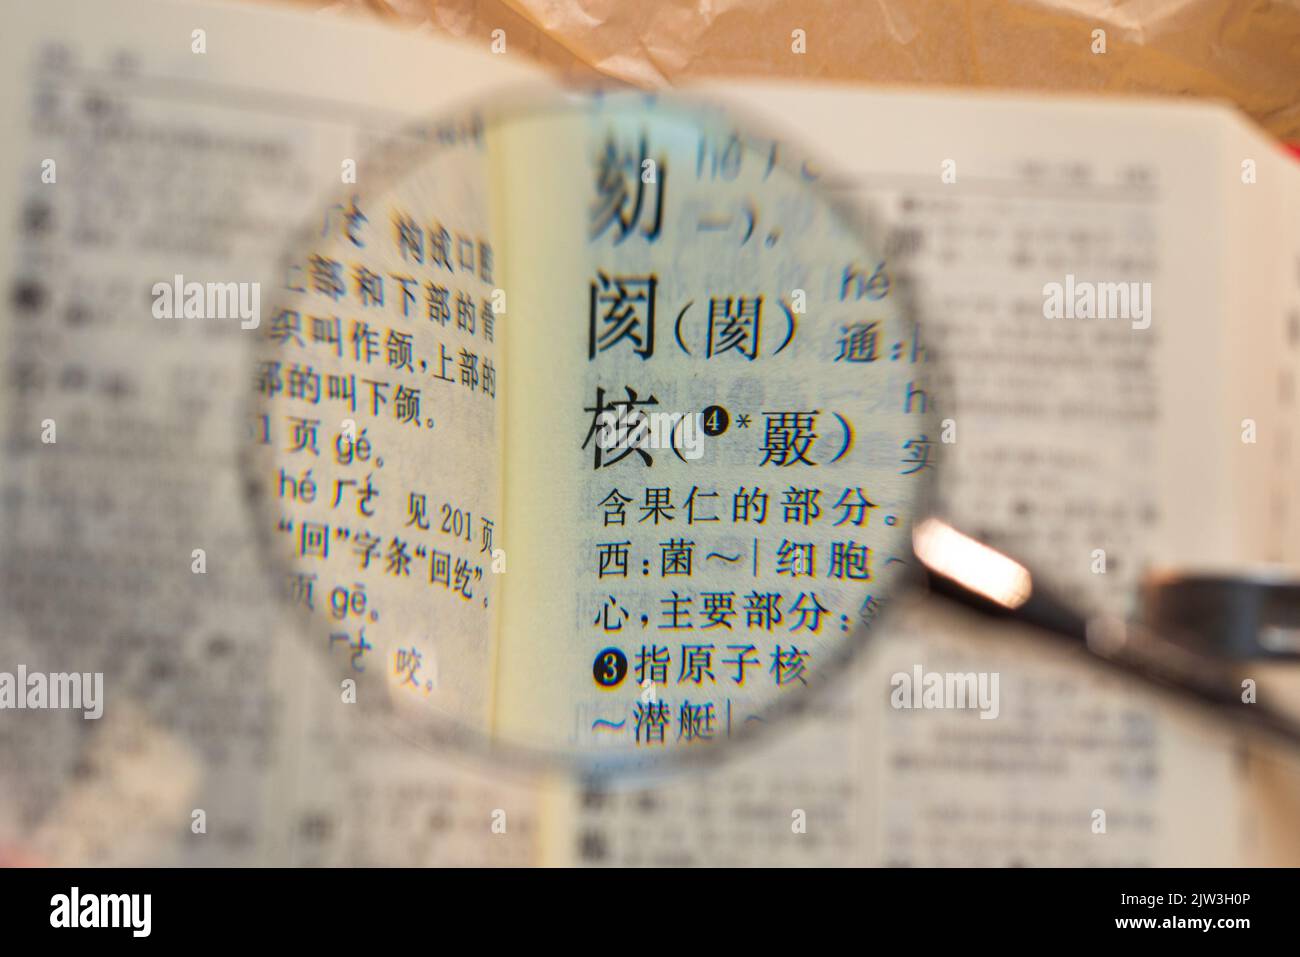 Nucleus in Chinese characters Stock Photo